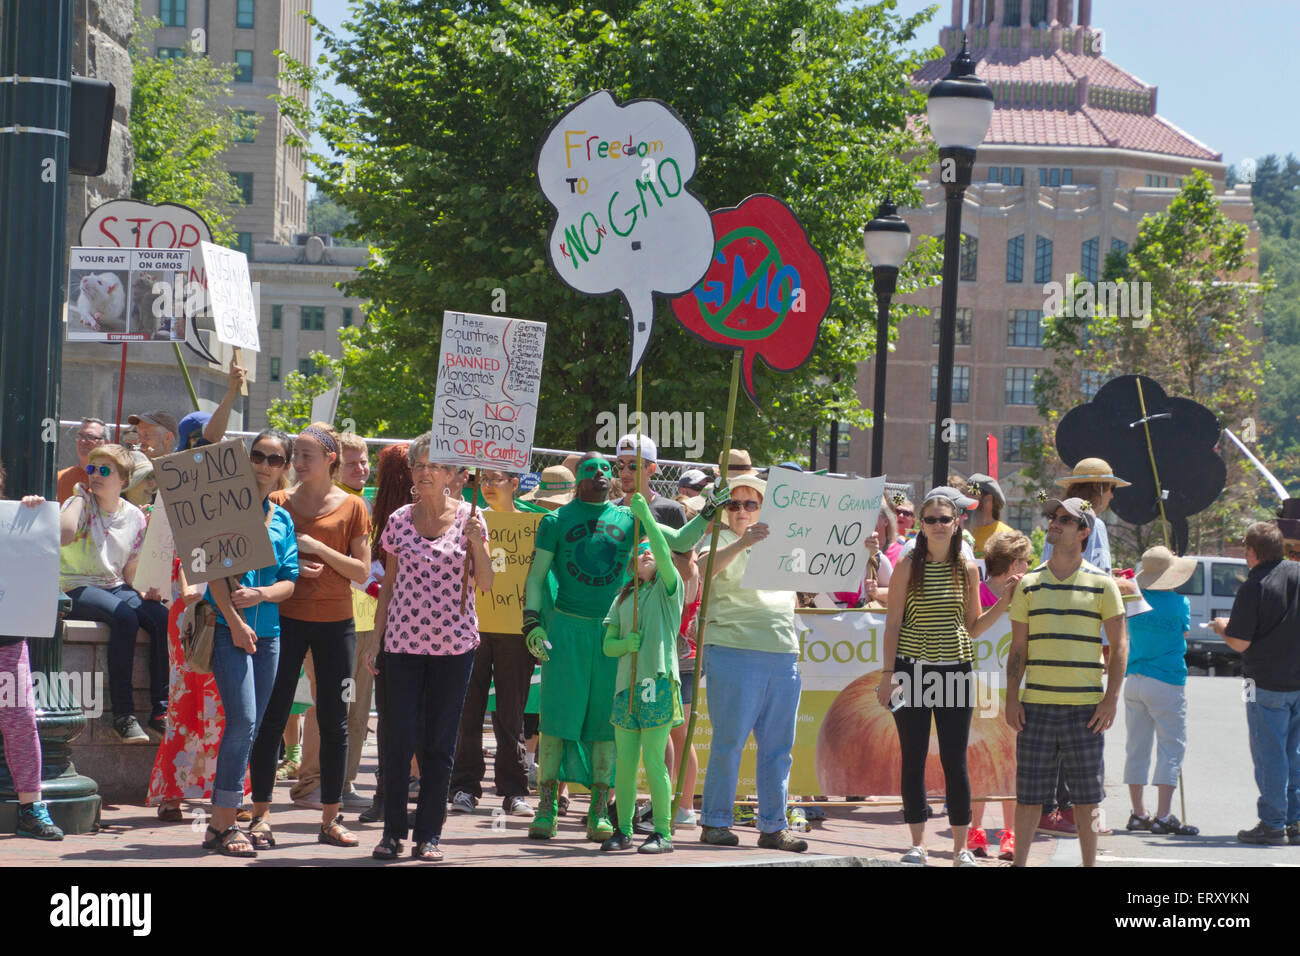 American activists hold signs and protest Monsanto and Genetically modified foods (GMOs) in downtown Asheville, NC Stock Photo